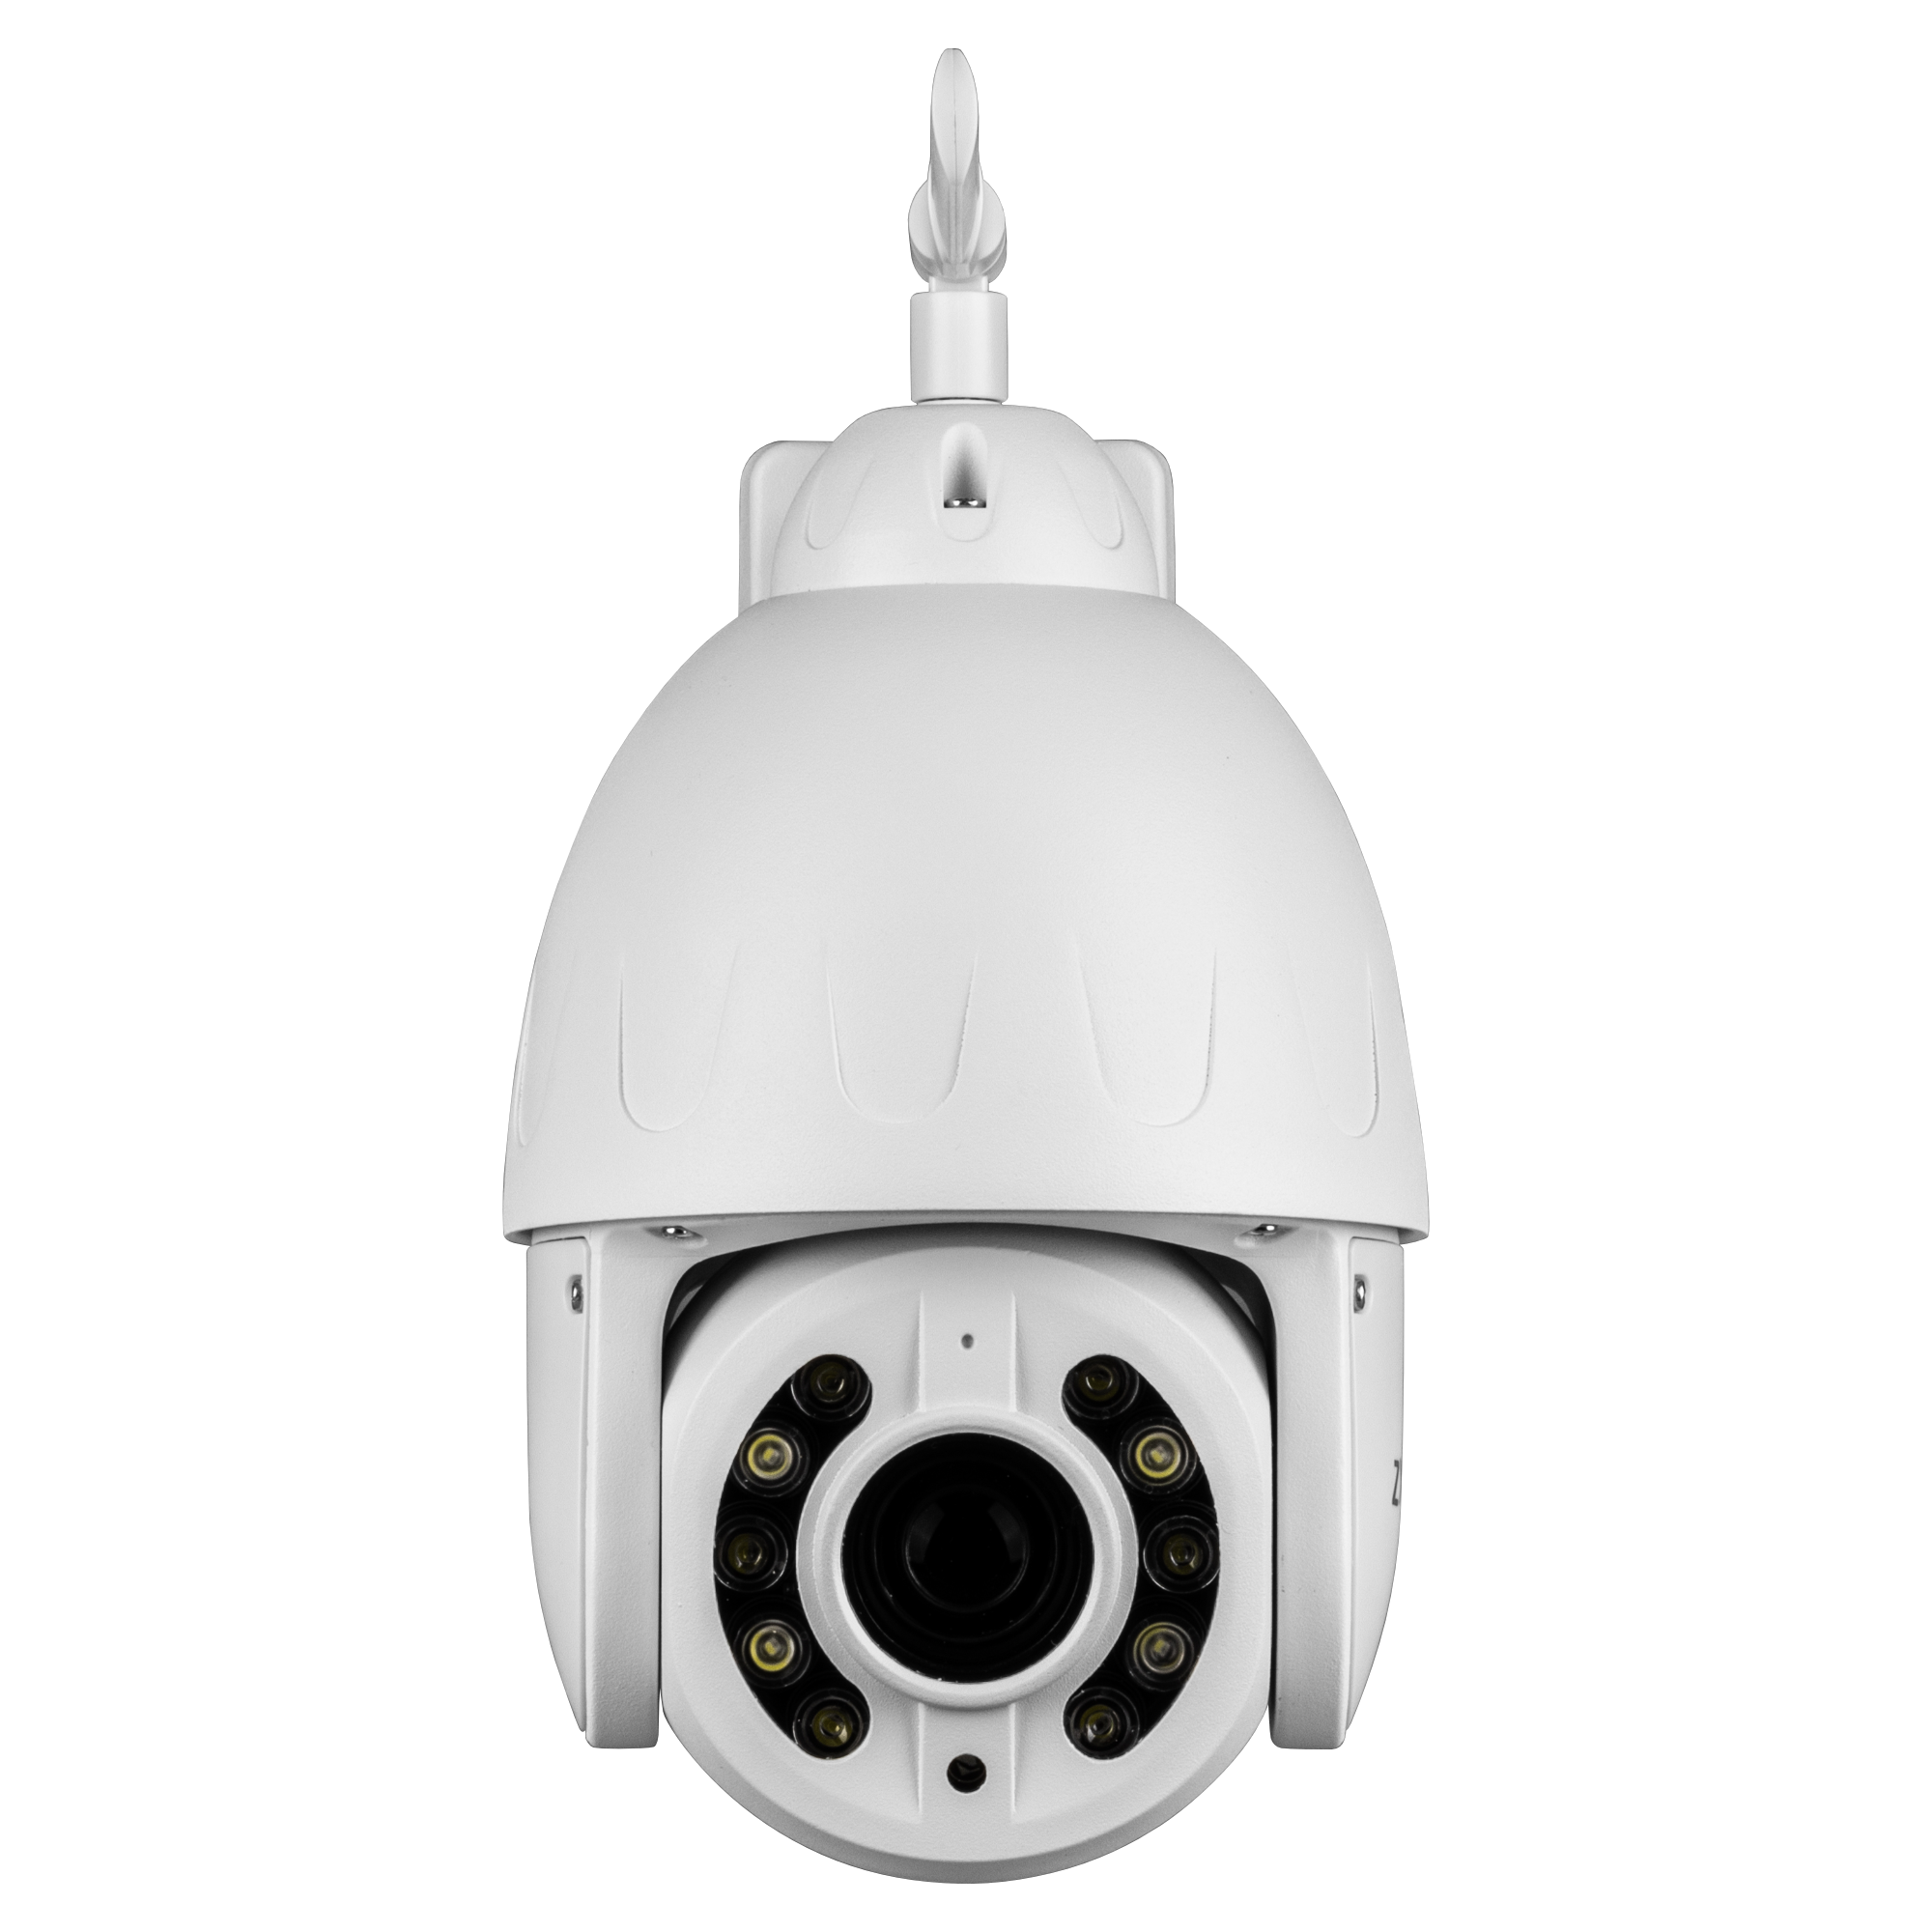 Zxtech PTZ Wireless Security Camera - 5MP/4MP 10X/5X Optical Zoom Full Colour Night Vision Face Detection Wifi 2-Way Audio SD Indoor/Outdoor